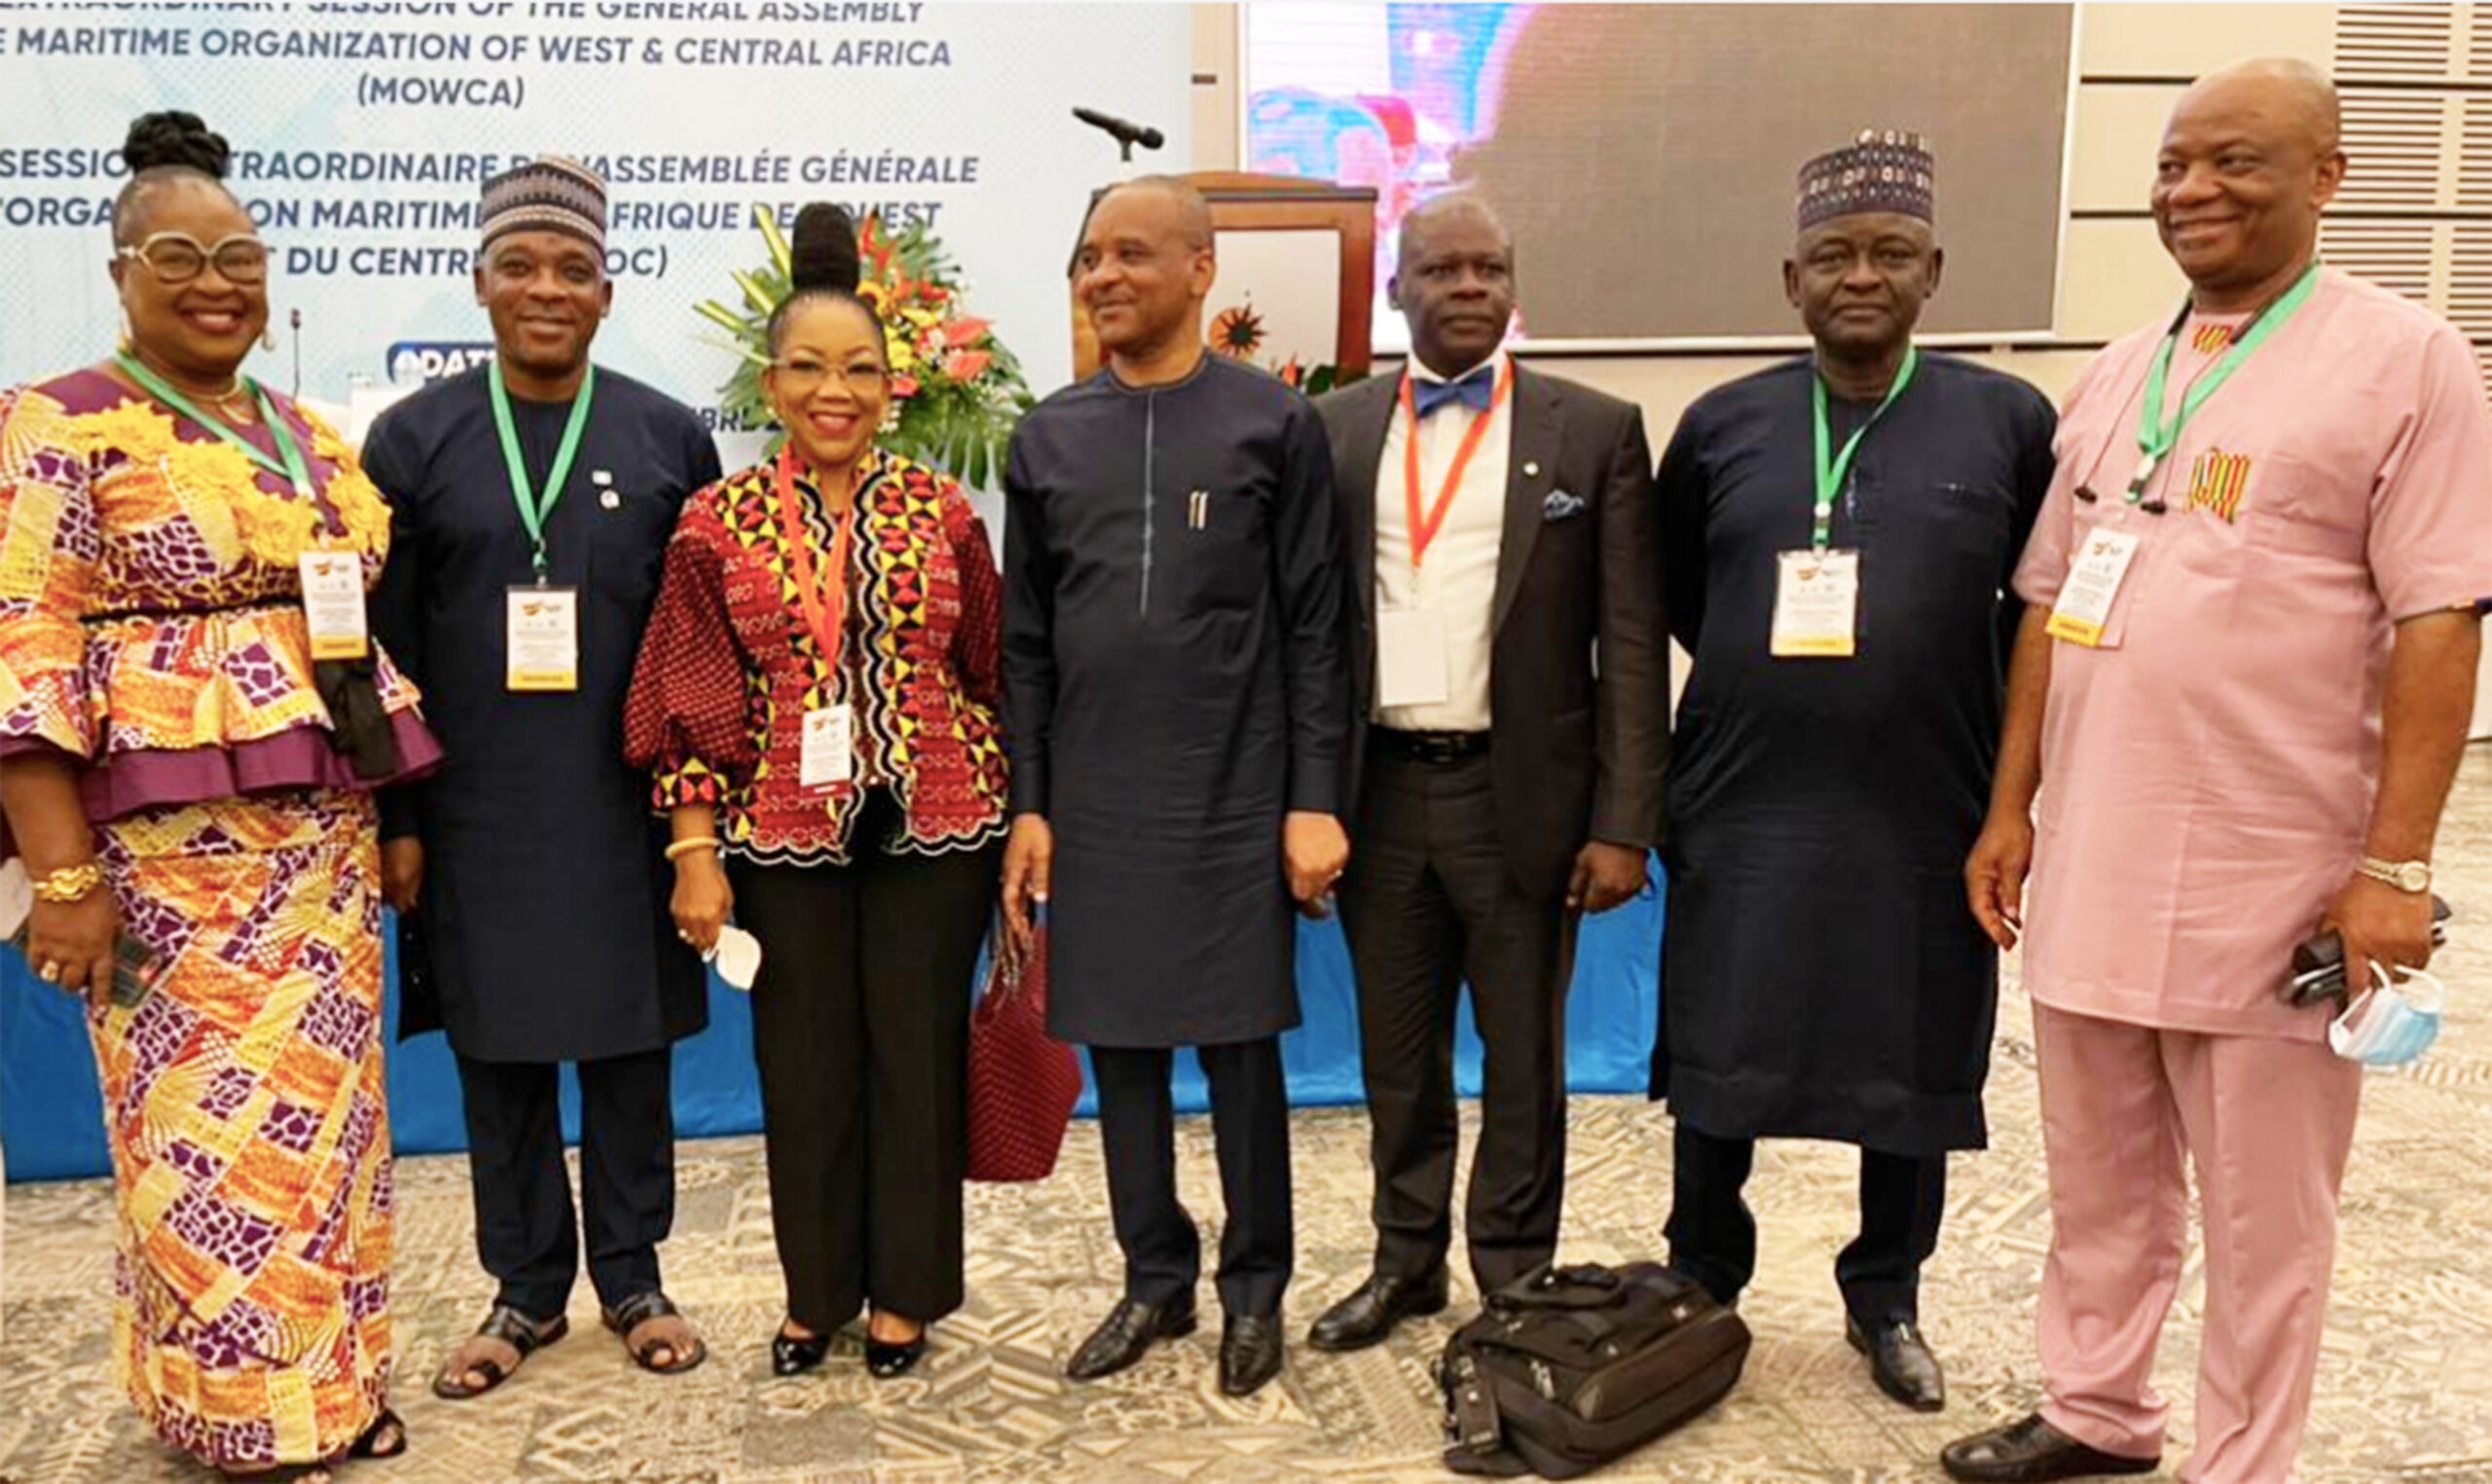 Photos: DG, NIMASA And Other Delegates From Nigeria And 24 Other Countries At MOWCA Extraordinary Session In Ghana.